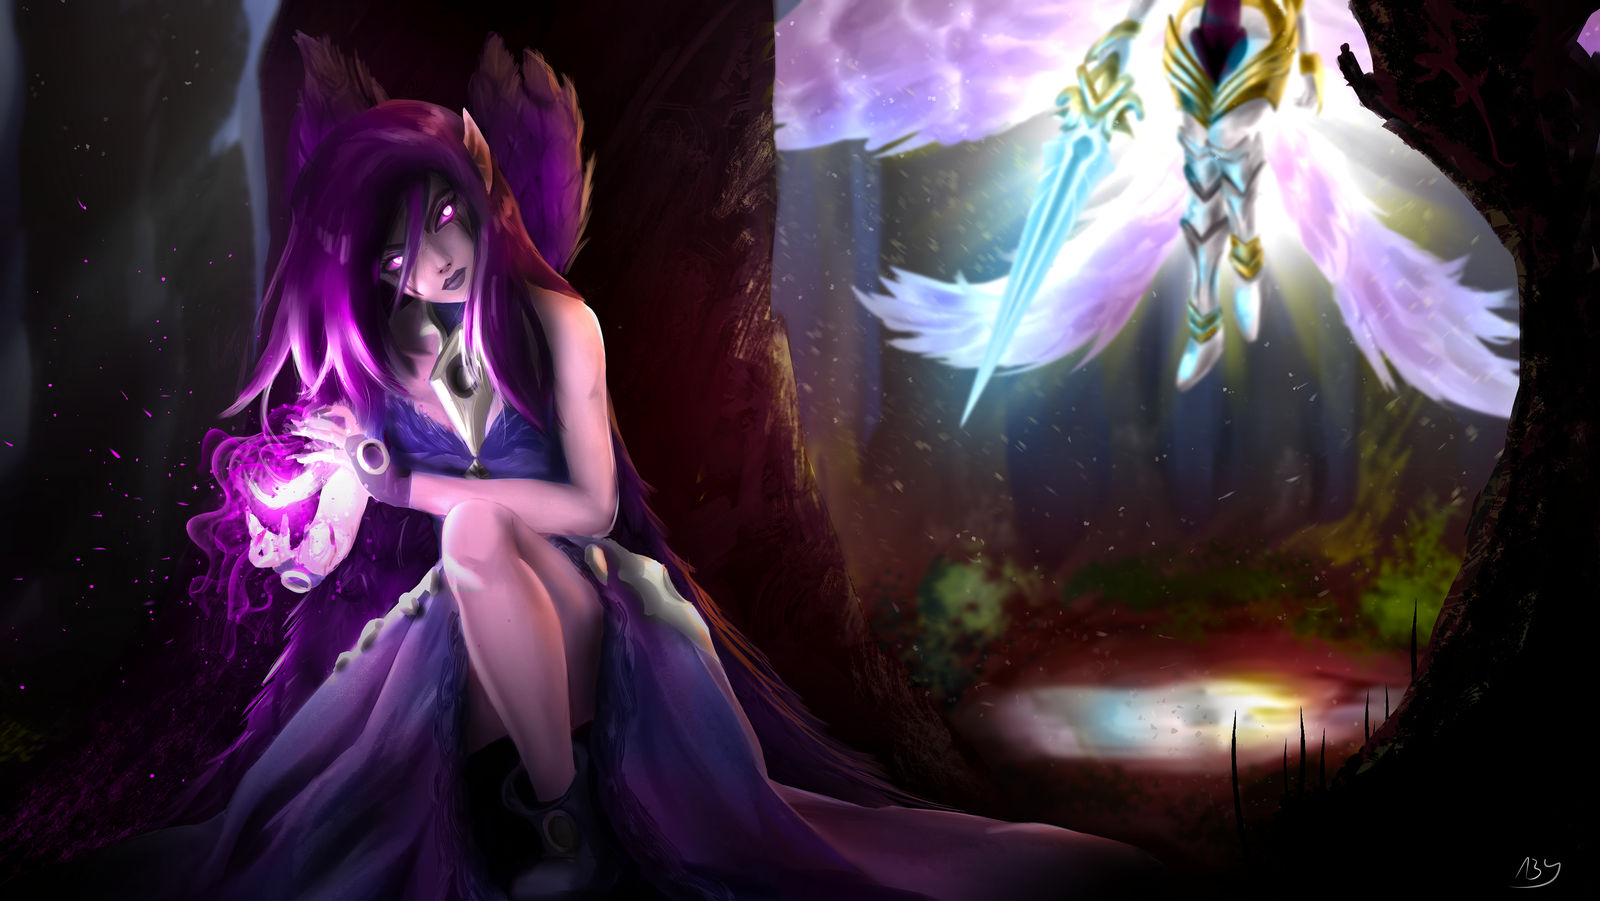 Come with me! - Morgana and Kayle fanart